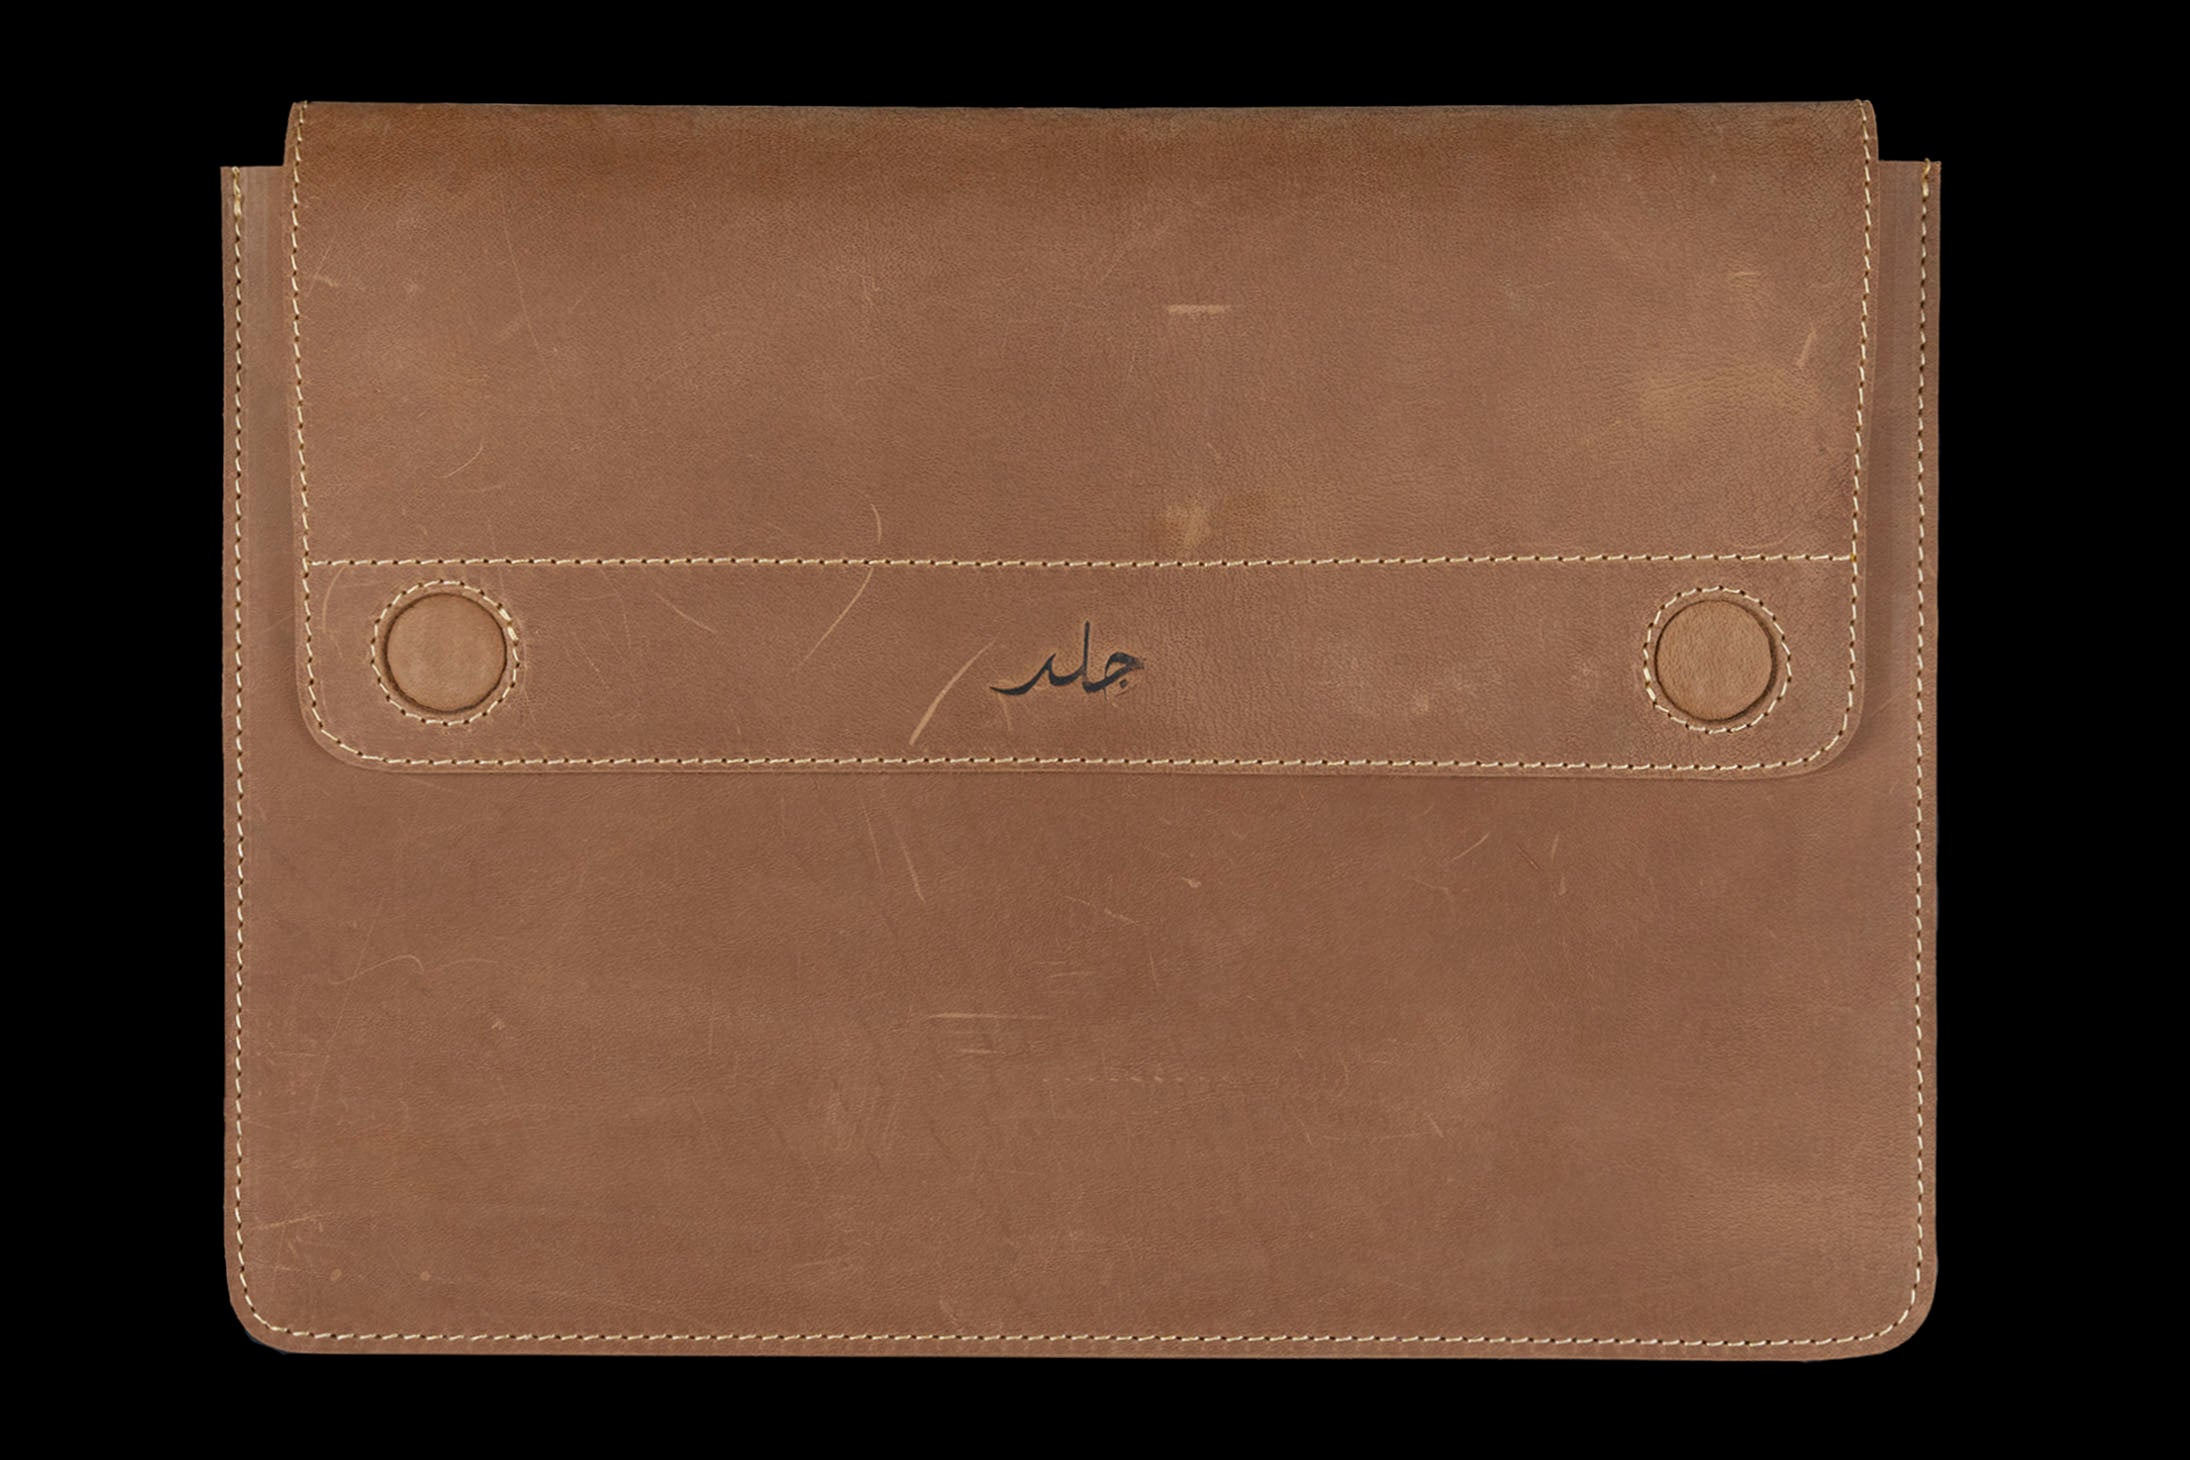 Leather Laptop Sleeve 13 Inch Brown - Trendy Store Pakistan